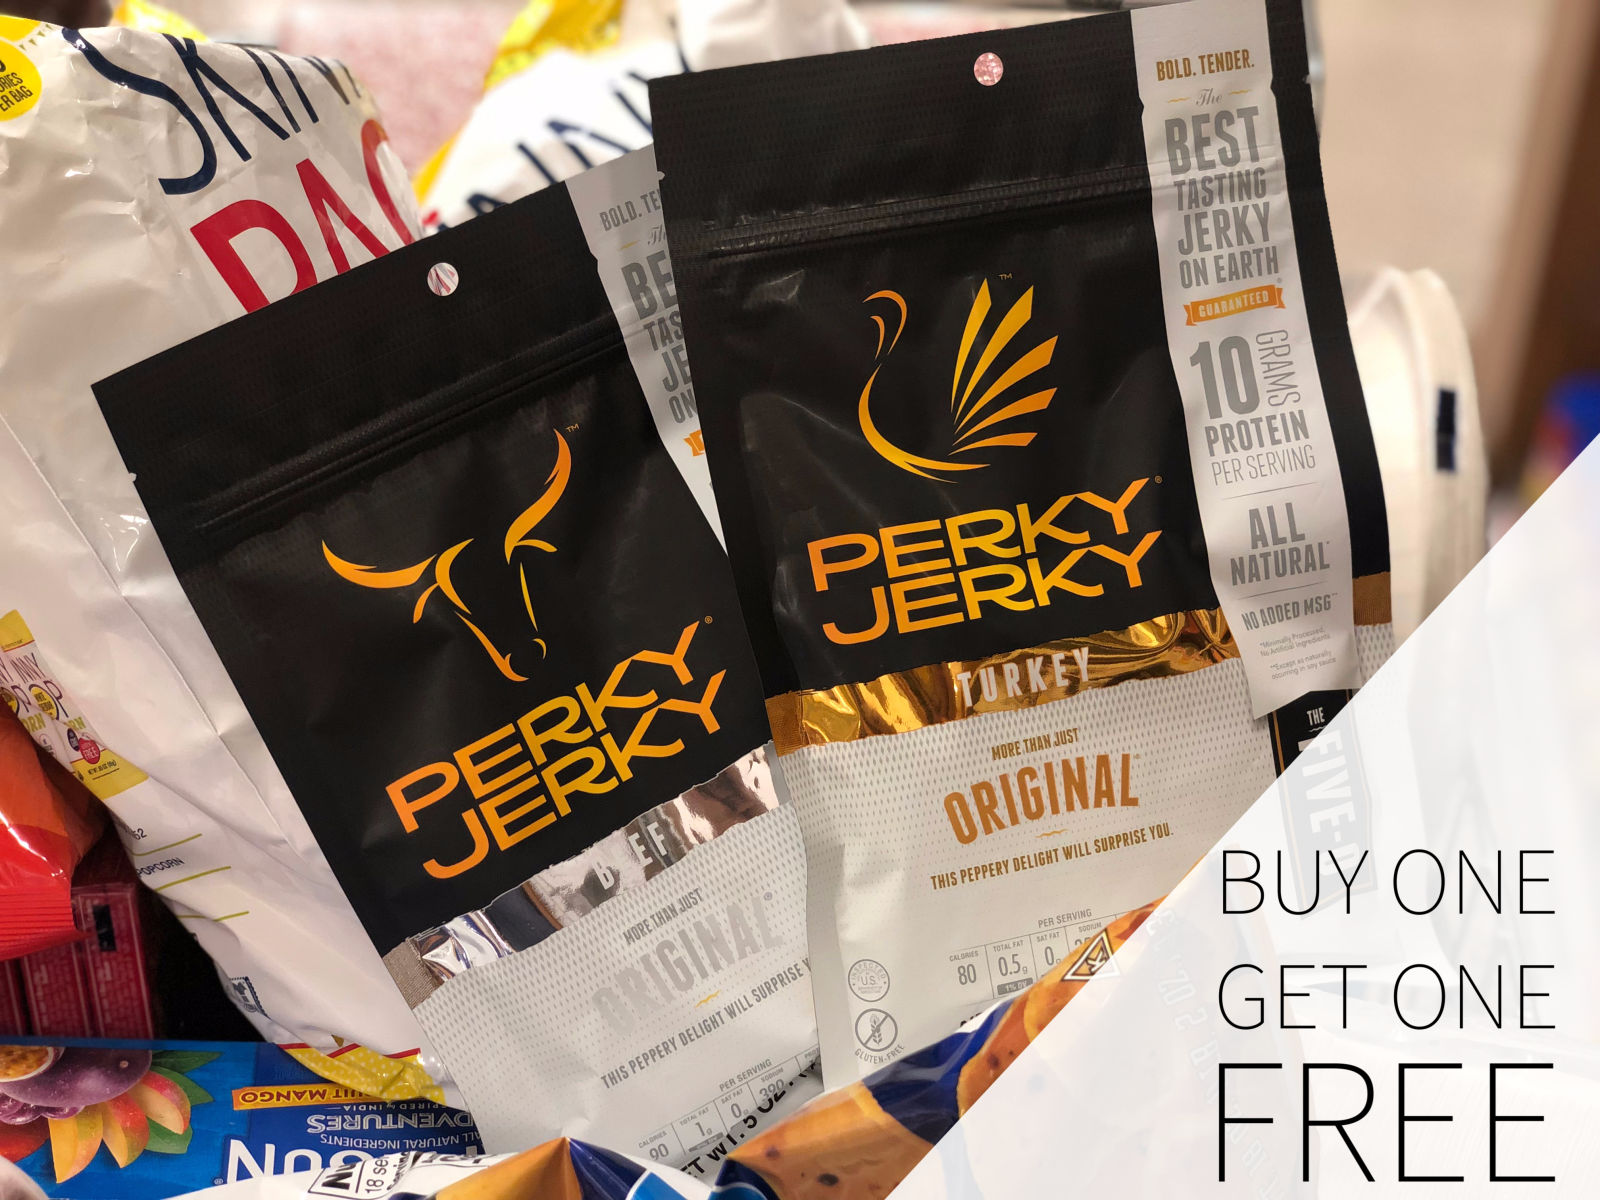 Stock Your Cart With The Best Tasting Jerky On Earth – Perky Jerky 5oz Bags Are BOGO At Publix!